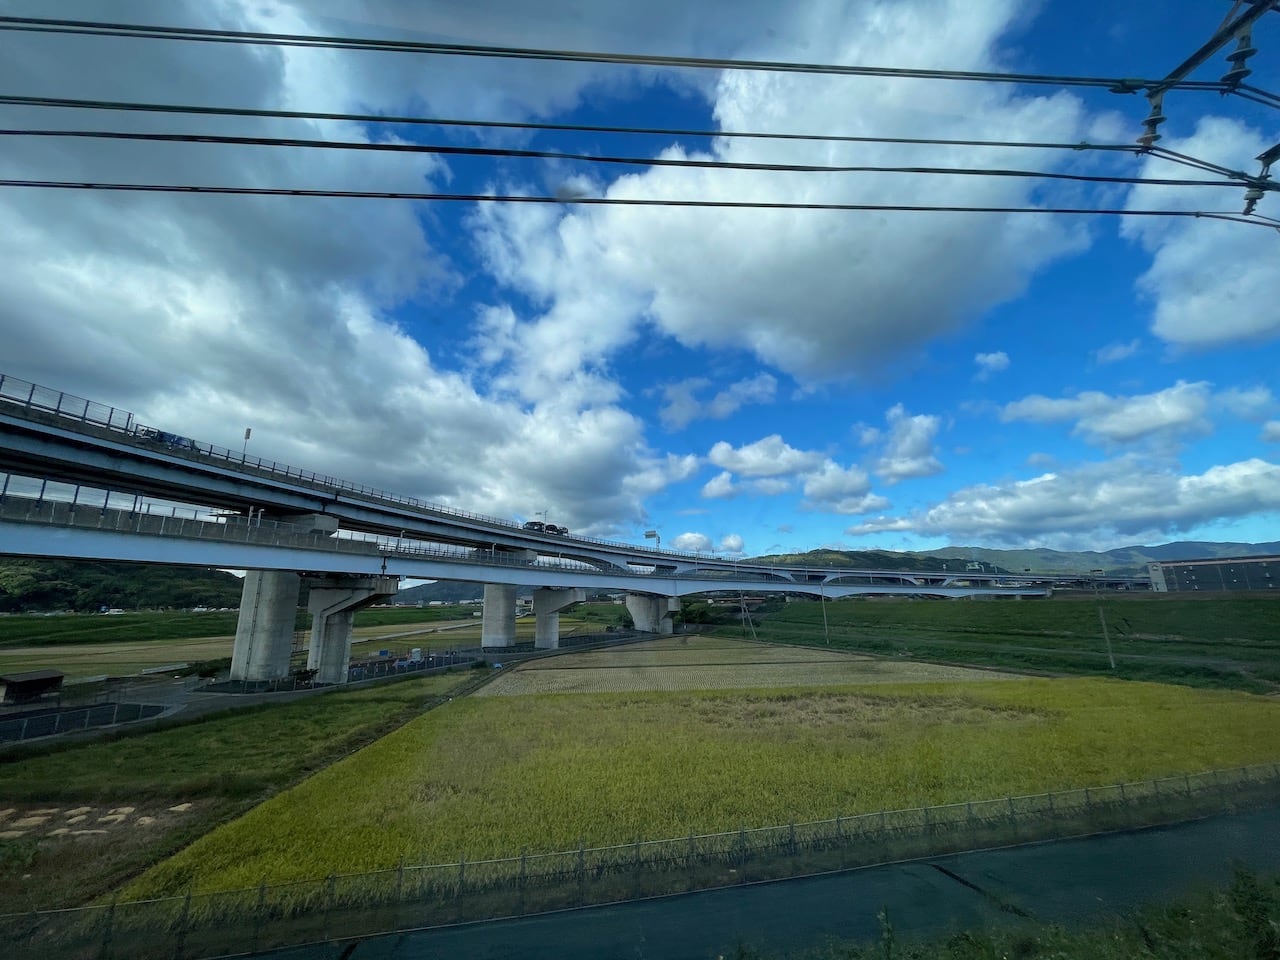 the skies on the way to Kyoto